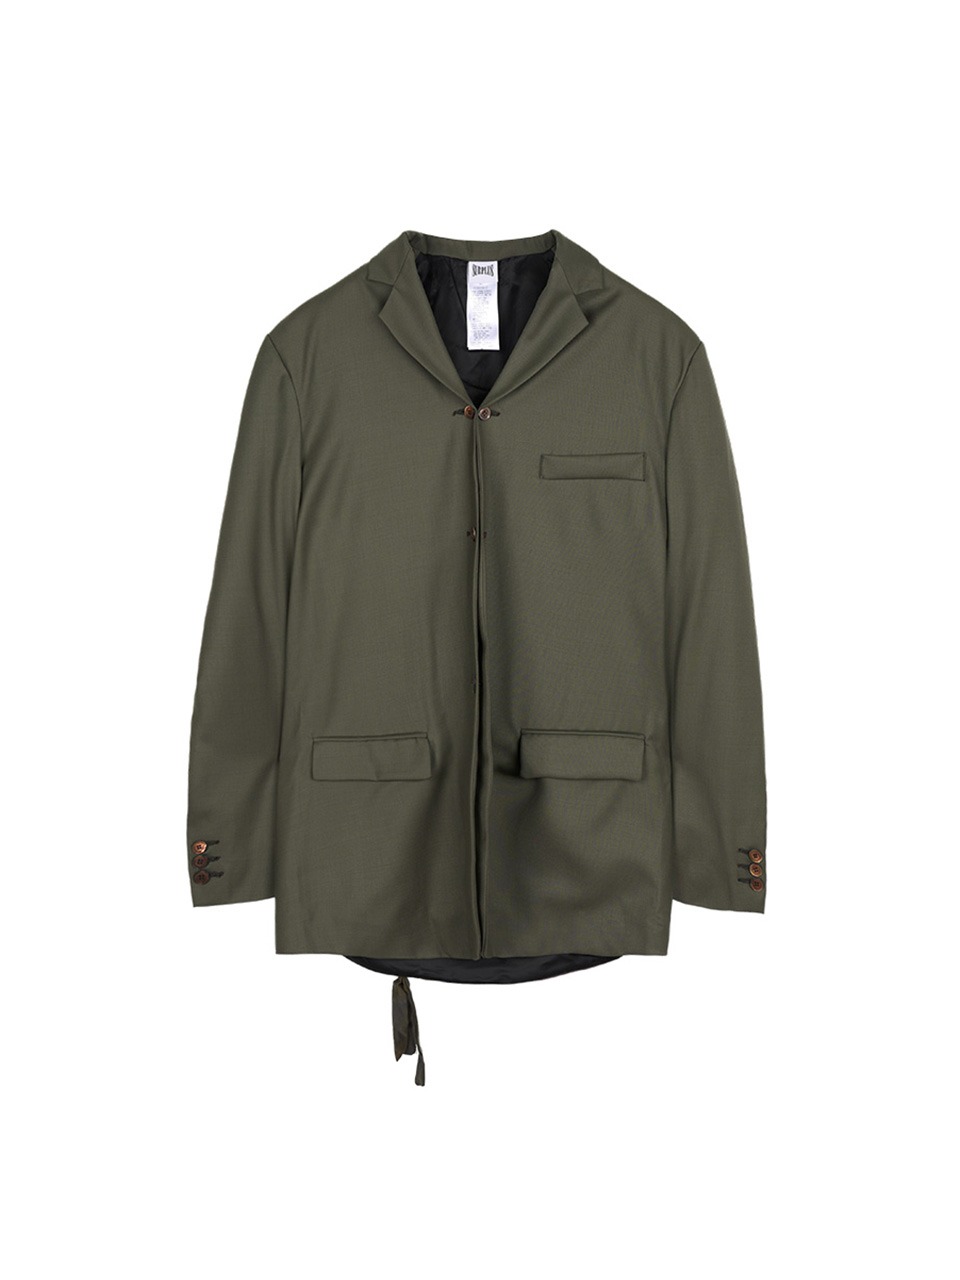 MAGLIANO - A DRUNK THREE BUTTONS JACKET (KHAKI BROWN)